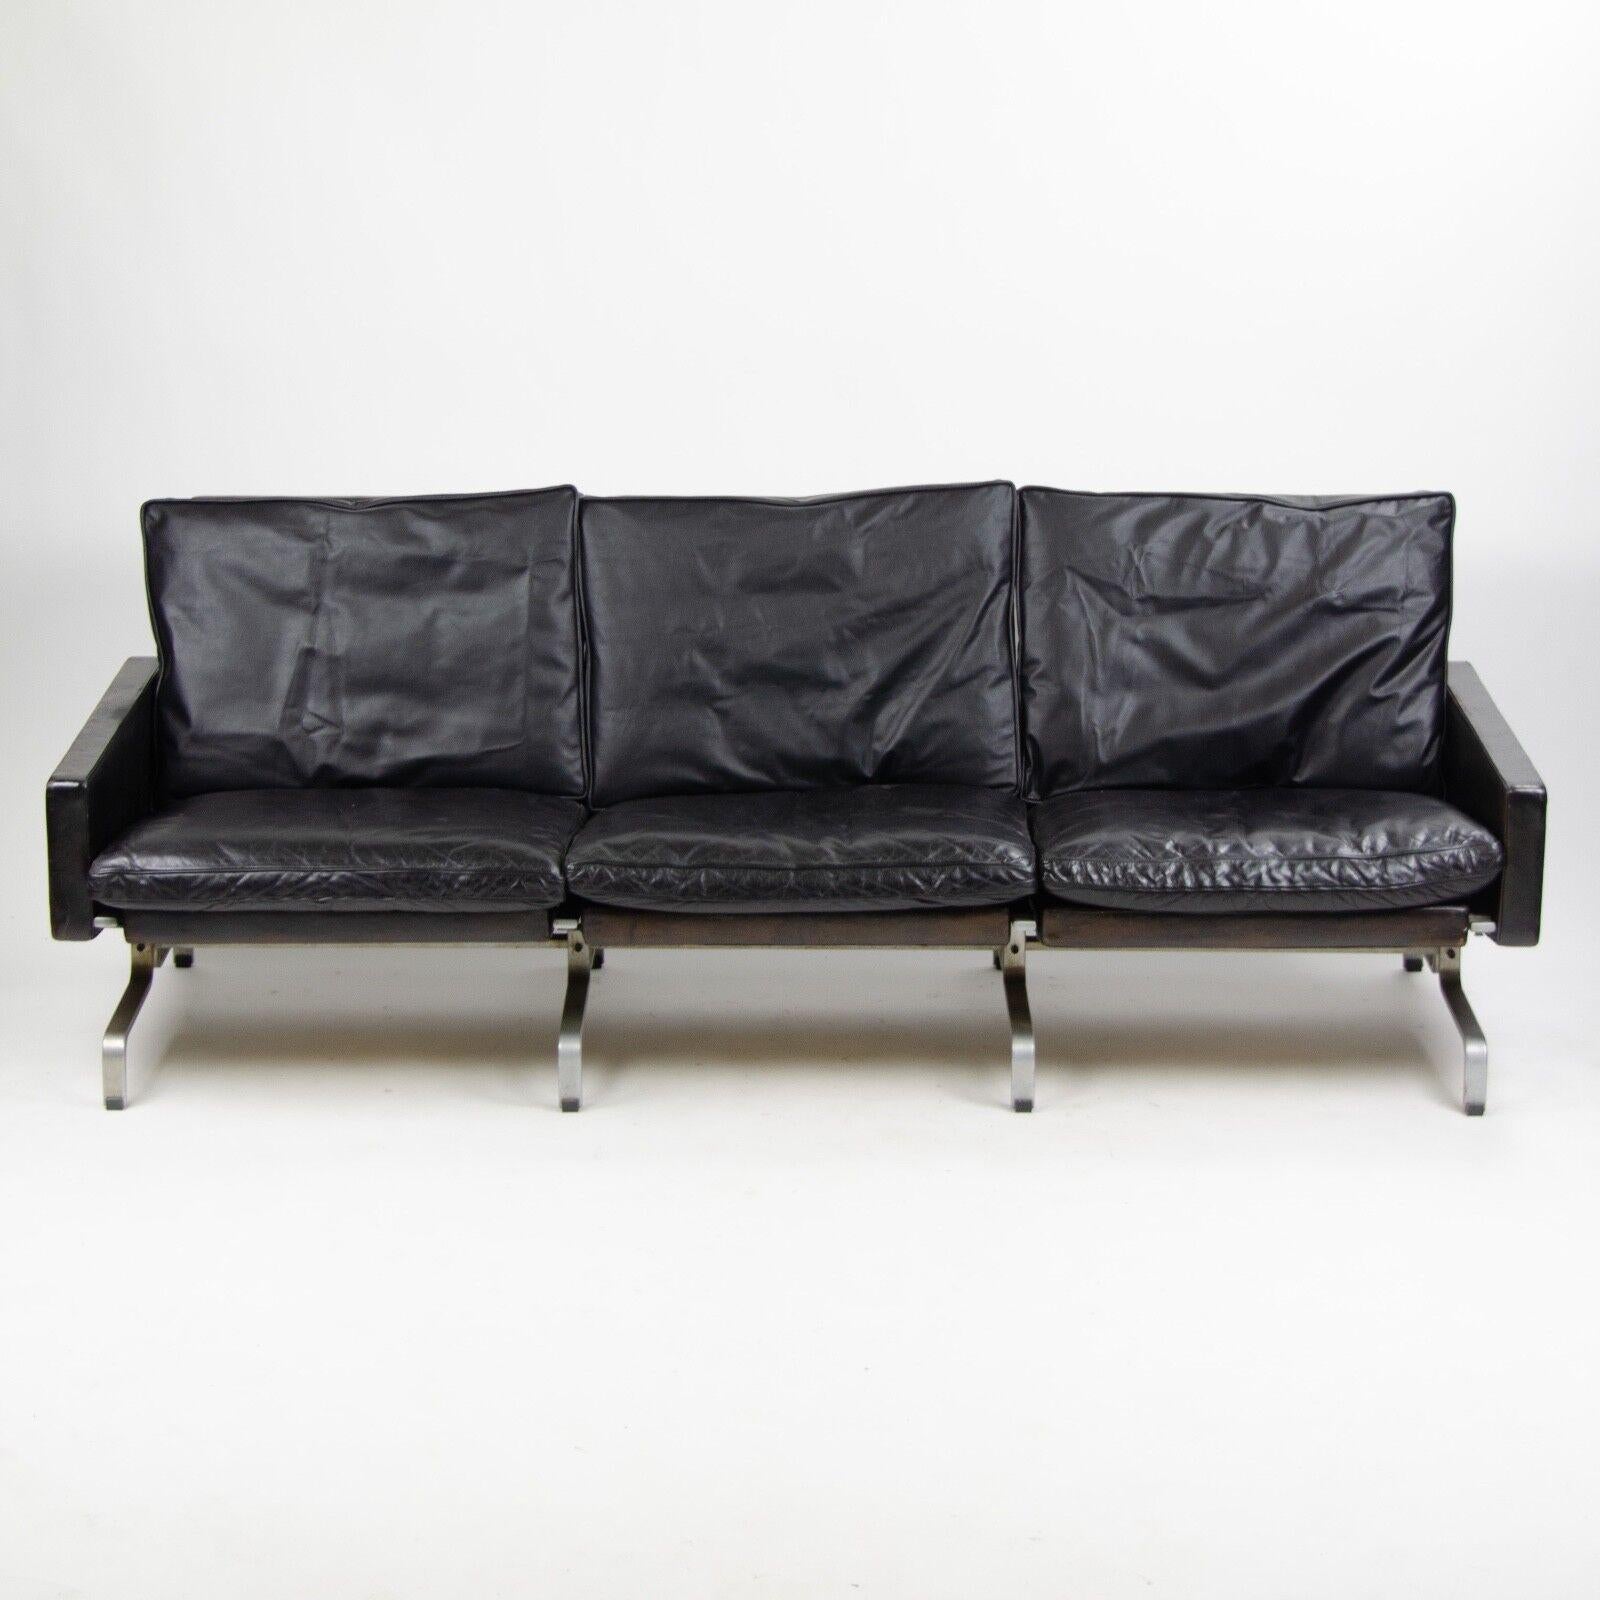 A very rare and quite special three-seater sofa, model PK31 3, designed by Poul Kjaerholm. The piece was produced by E Kold Christensen in Denmark.

This example is upholstered in a beautiful black leather. A lovely patina can be found most